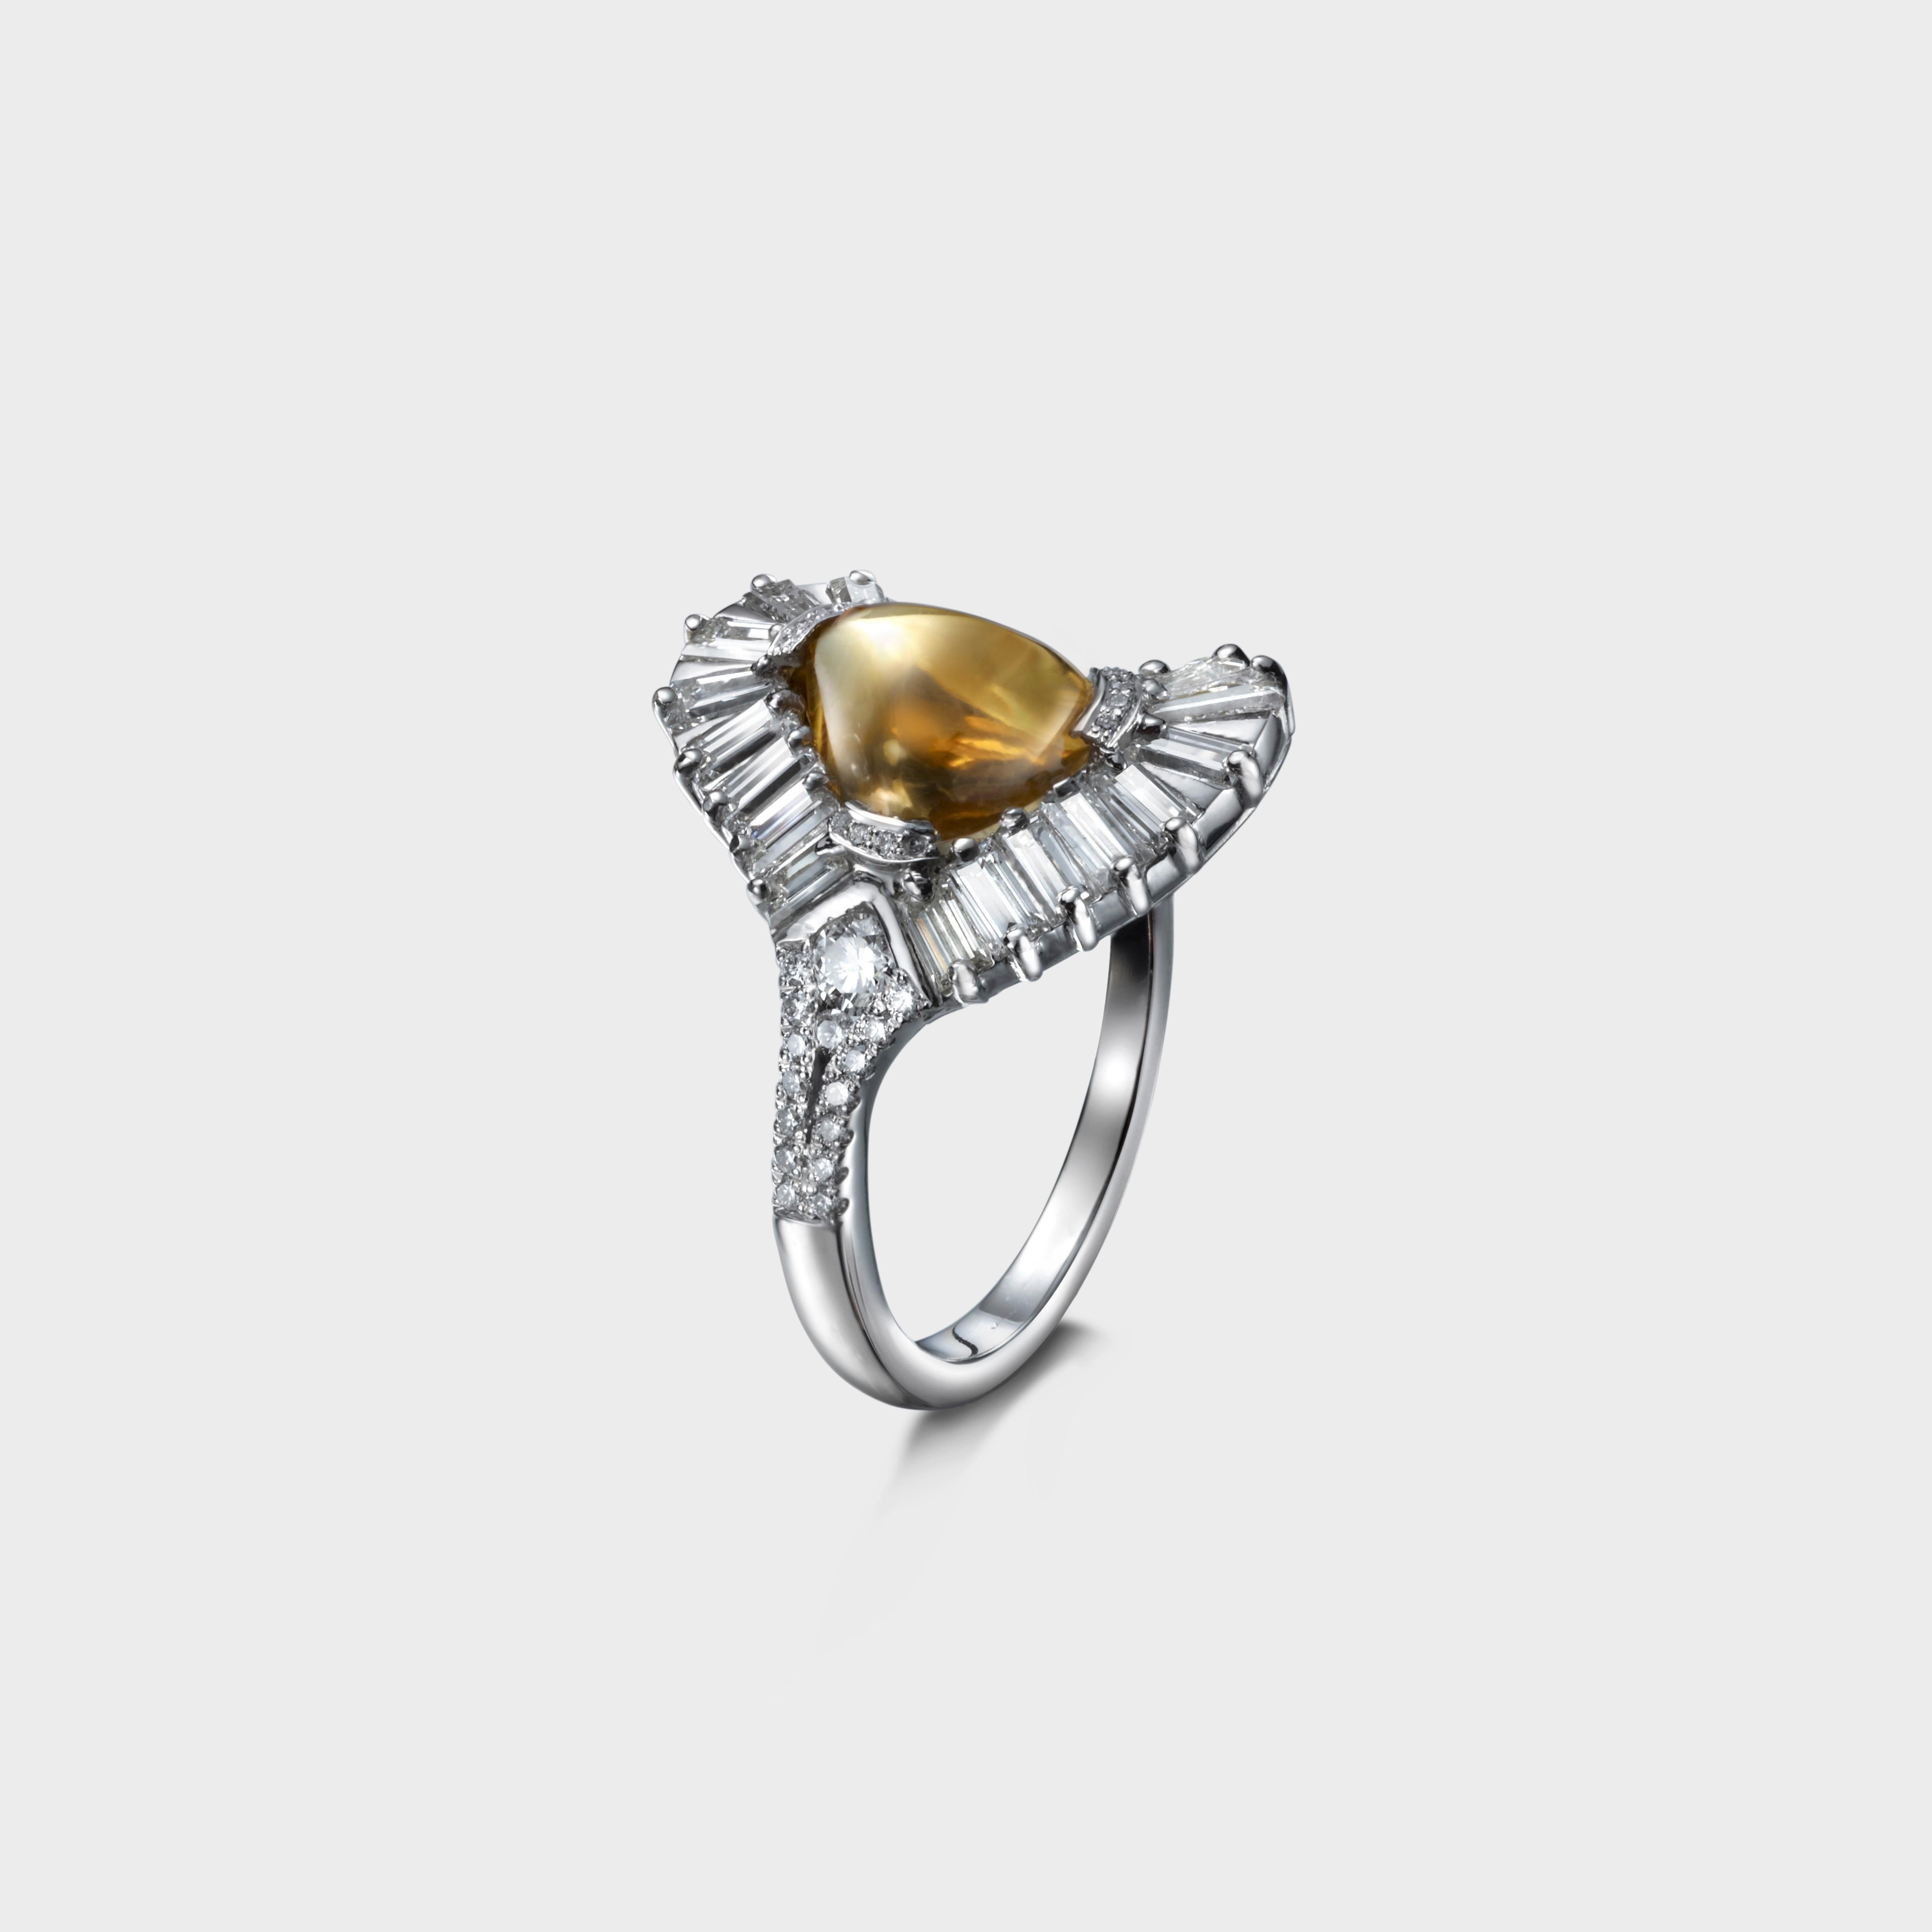 A unique design with flowing lines. A 9.5 x 7.5 mm loaf cut citrine sits at the centre surrounded with 21 baguette diamonds weighing 1.55 carats .  The semi rub-over claws that hold the amethyst are delicately set with 0.8 mm diamonds. One side of